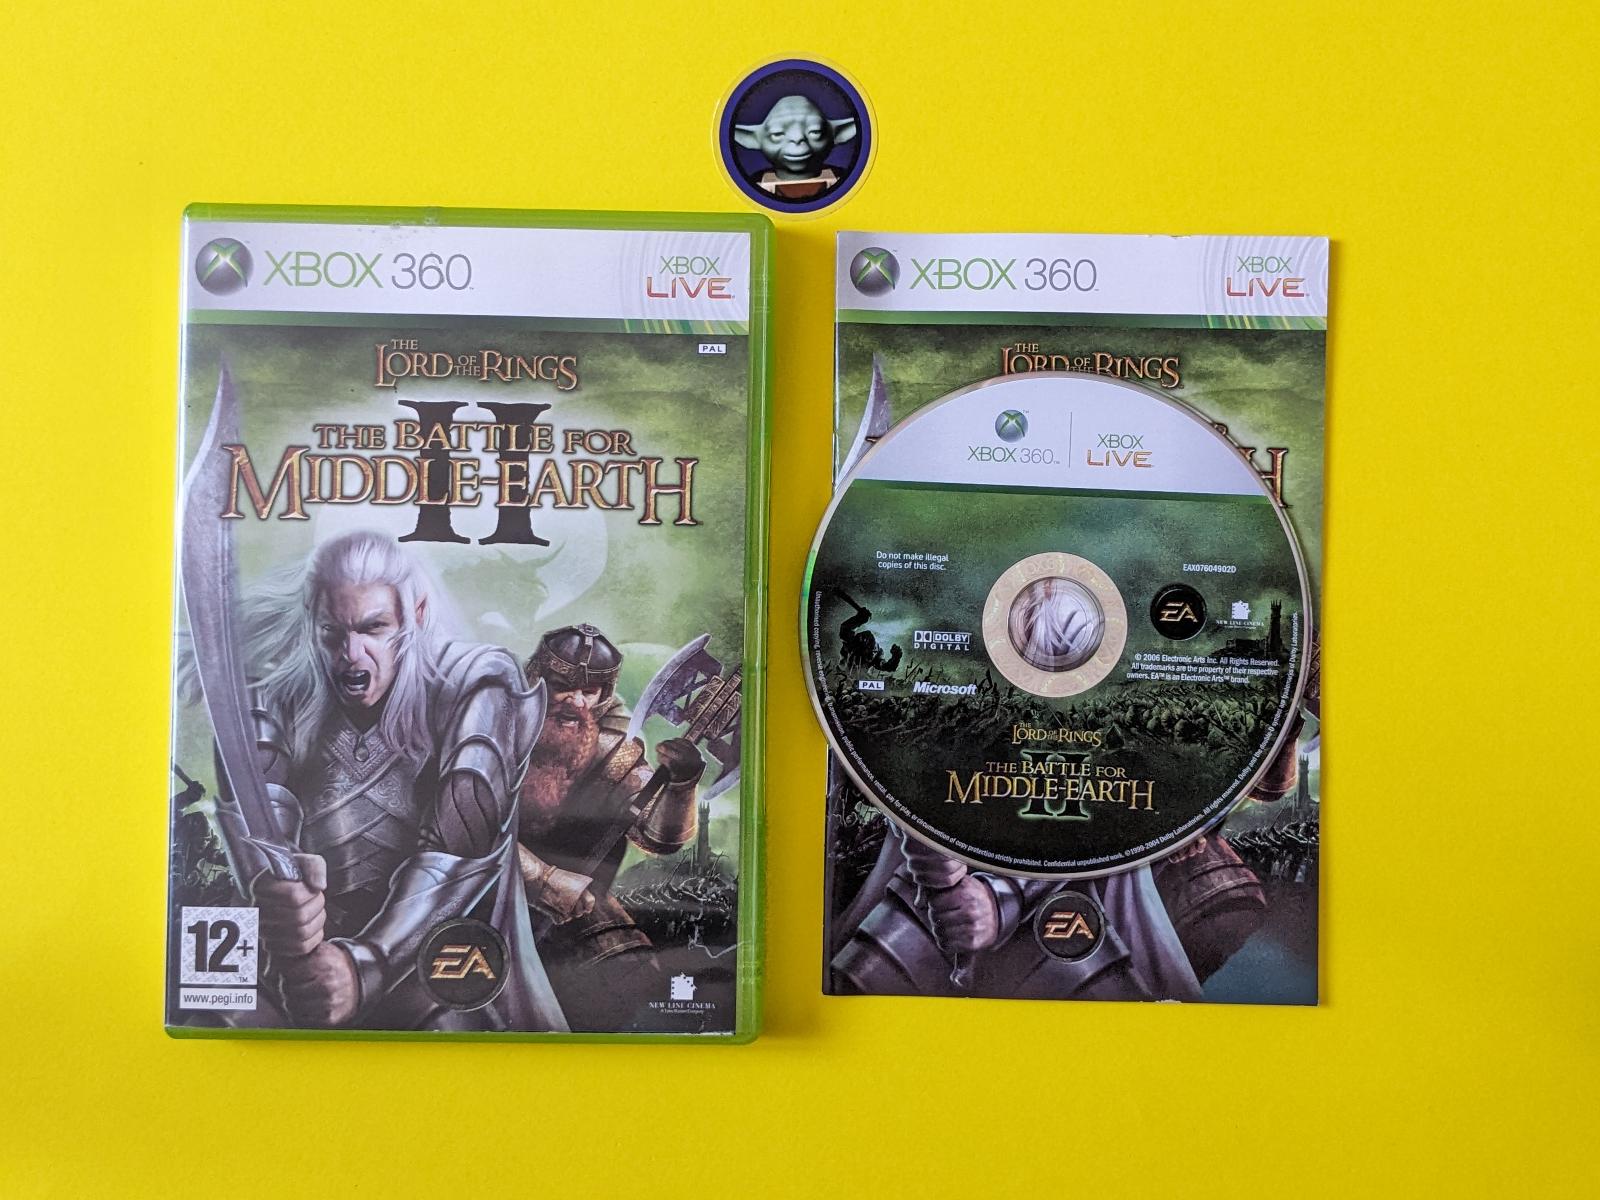 Lord of The Rings Battle pre Middle-Earth 2 (BFME) na Xbox 360 - Hry